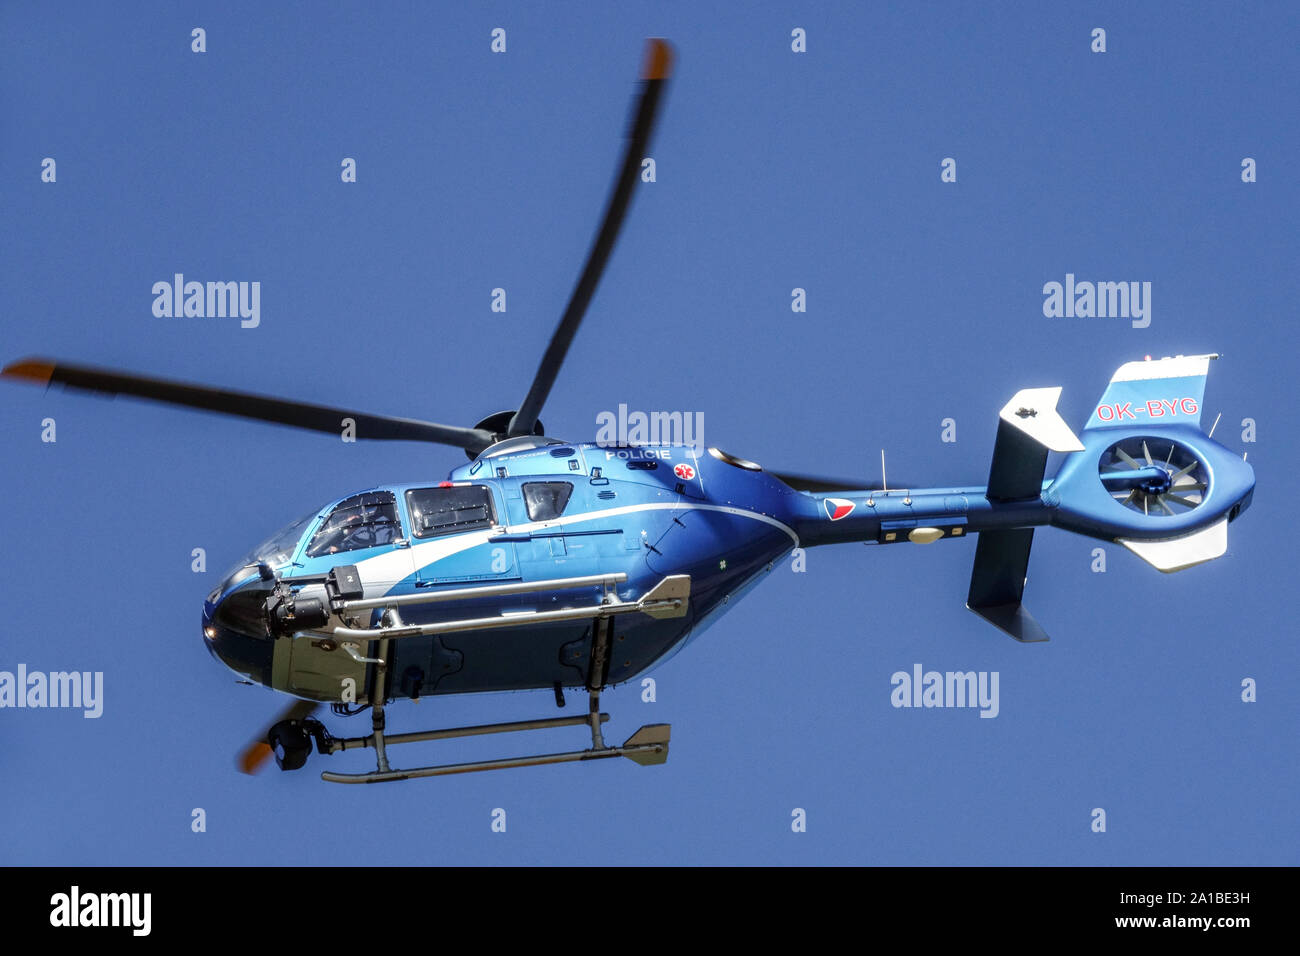 Czech police helicopter Eurocopter EC135 Stock Photo